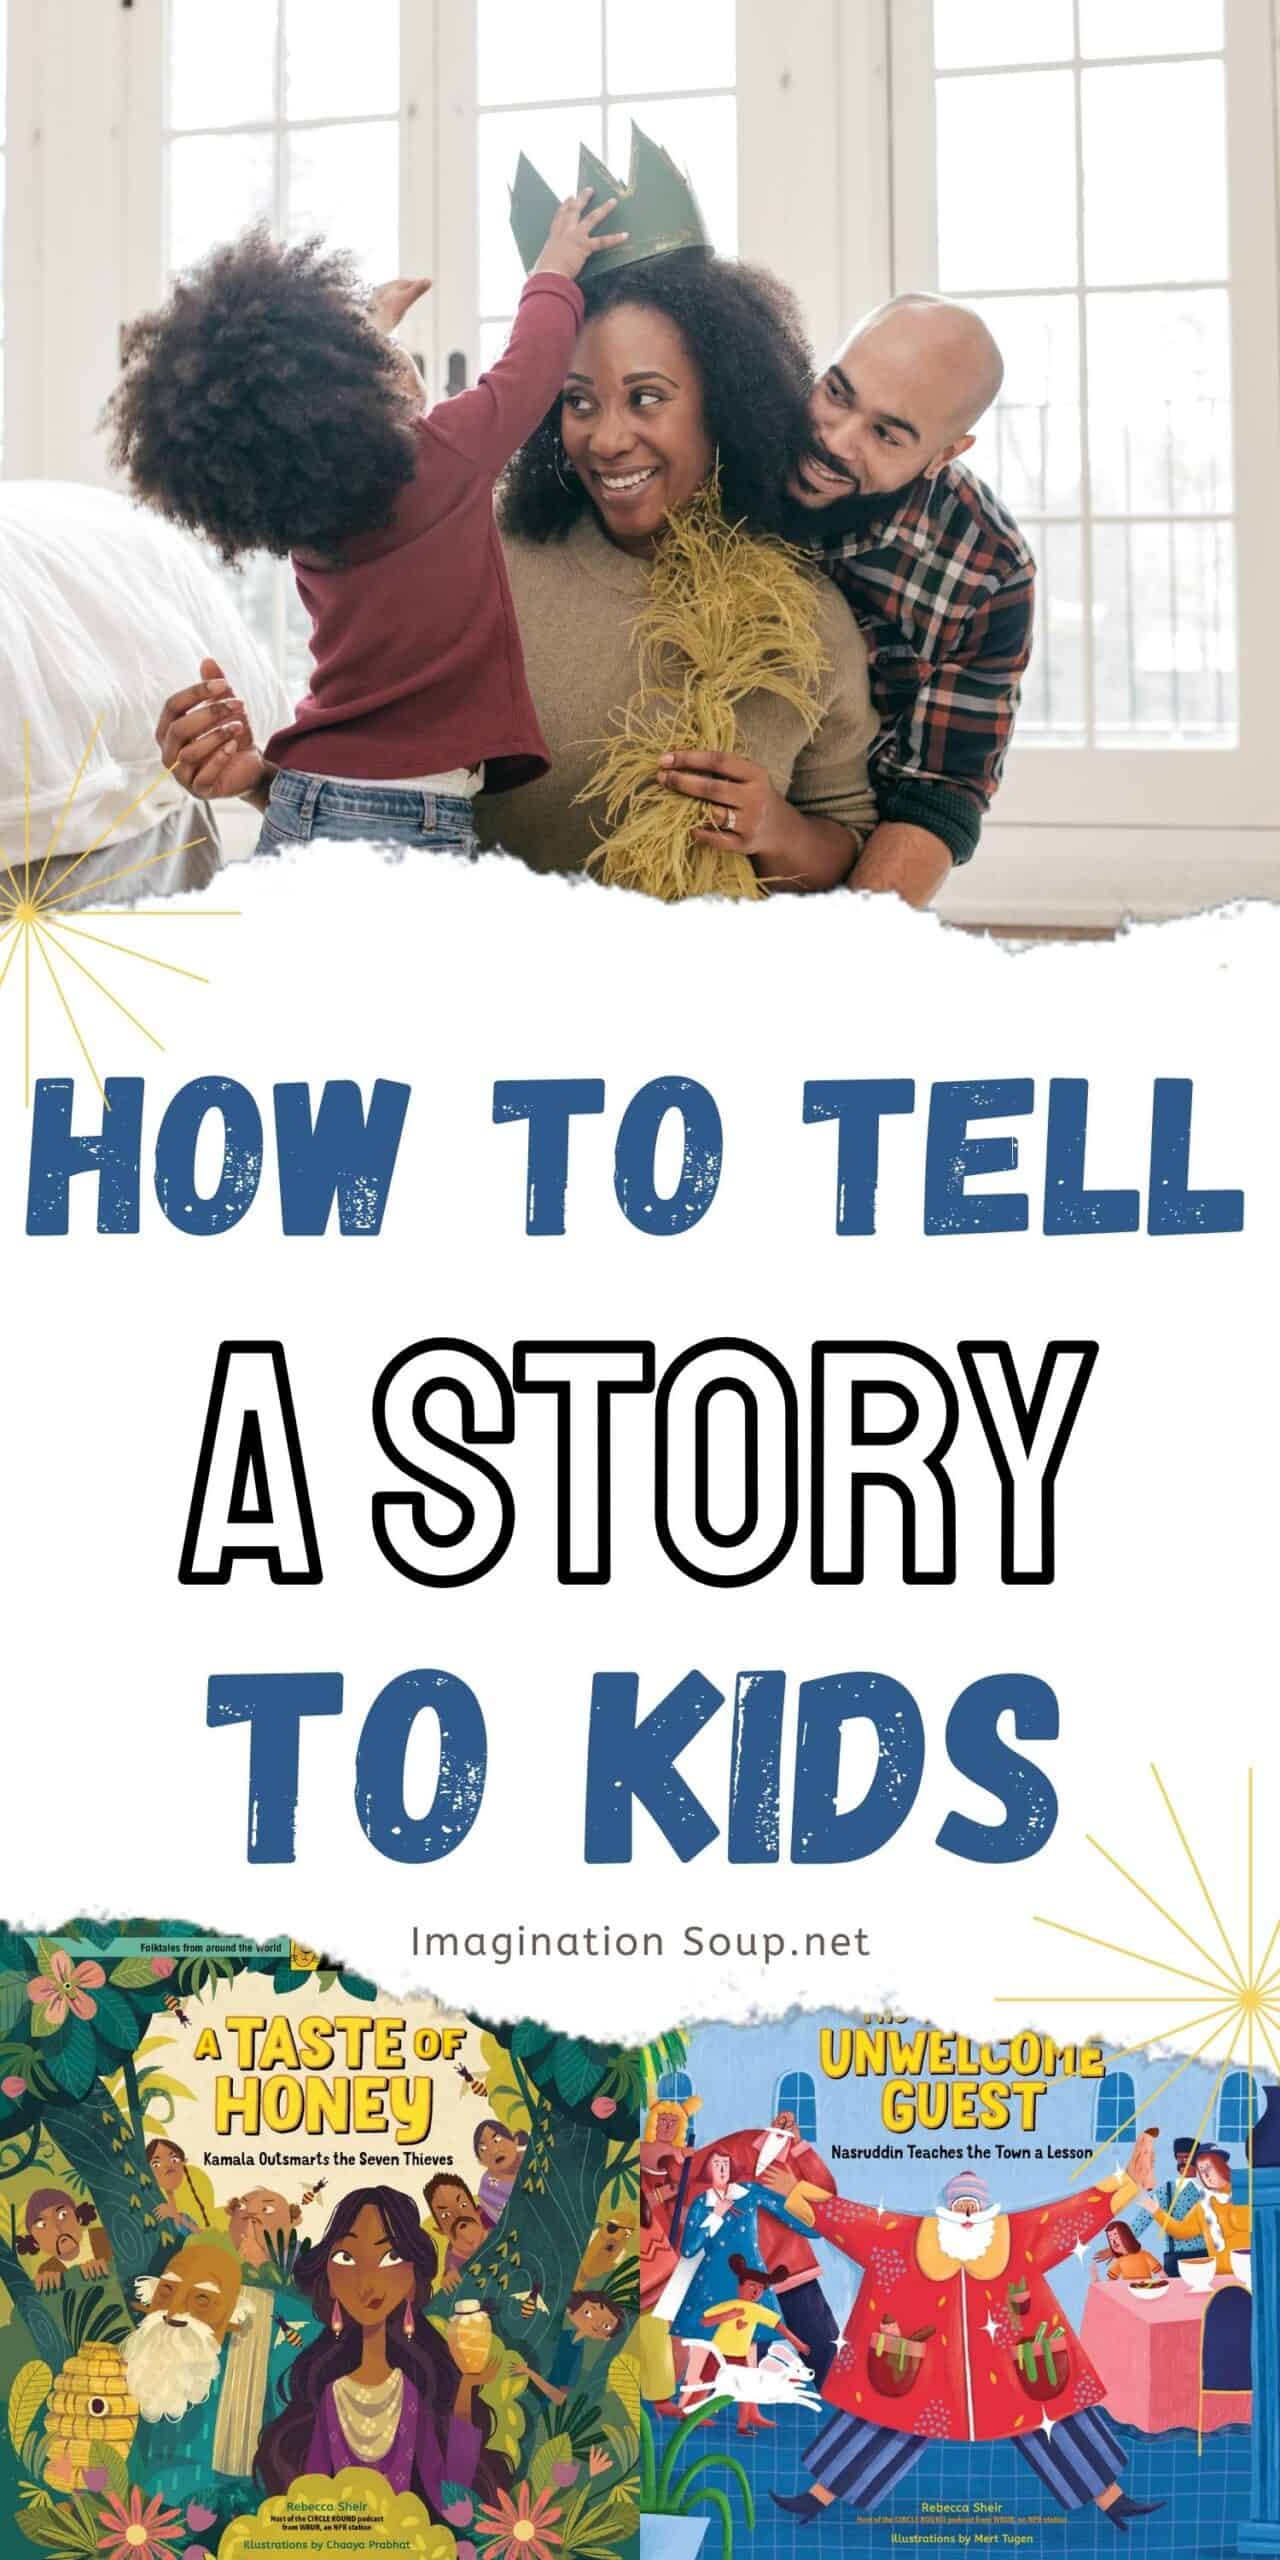 How to make up and tell a story to kids